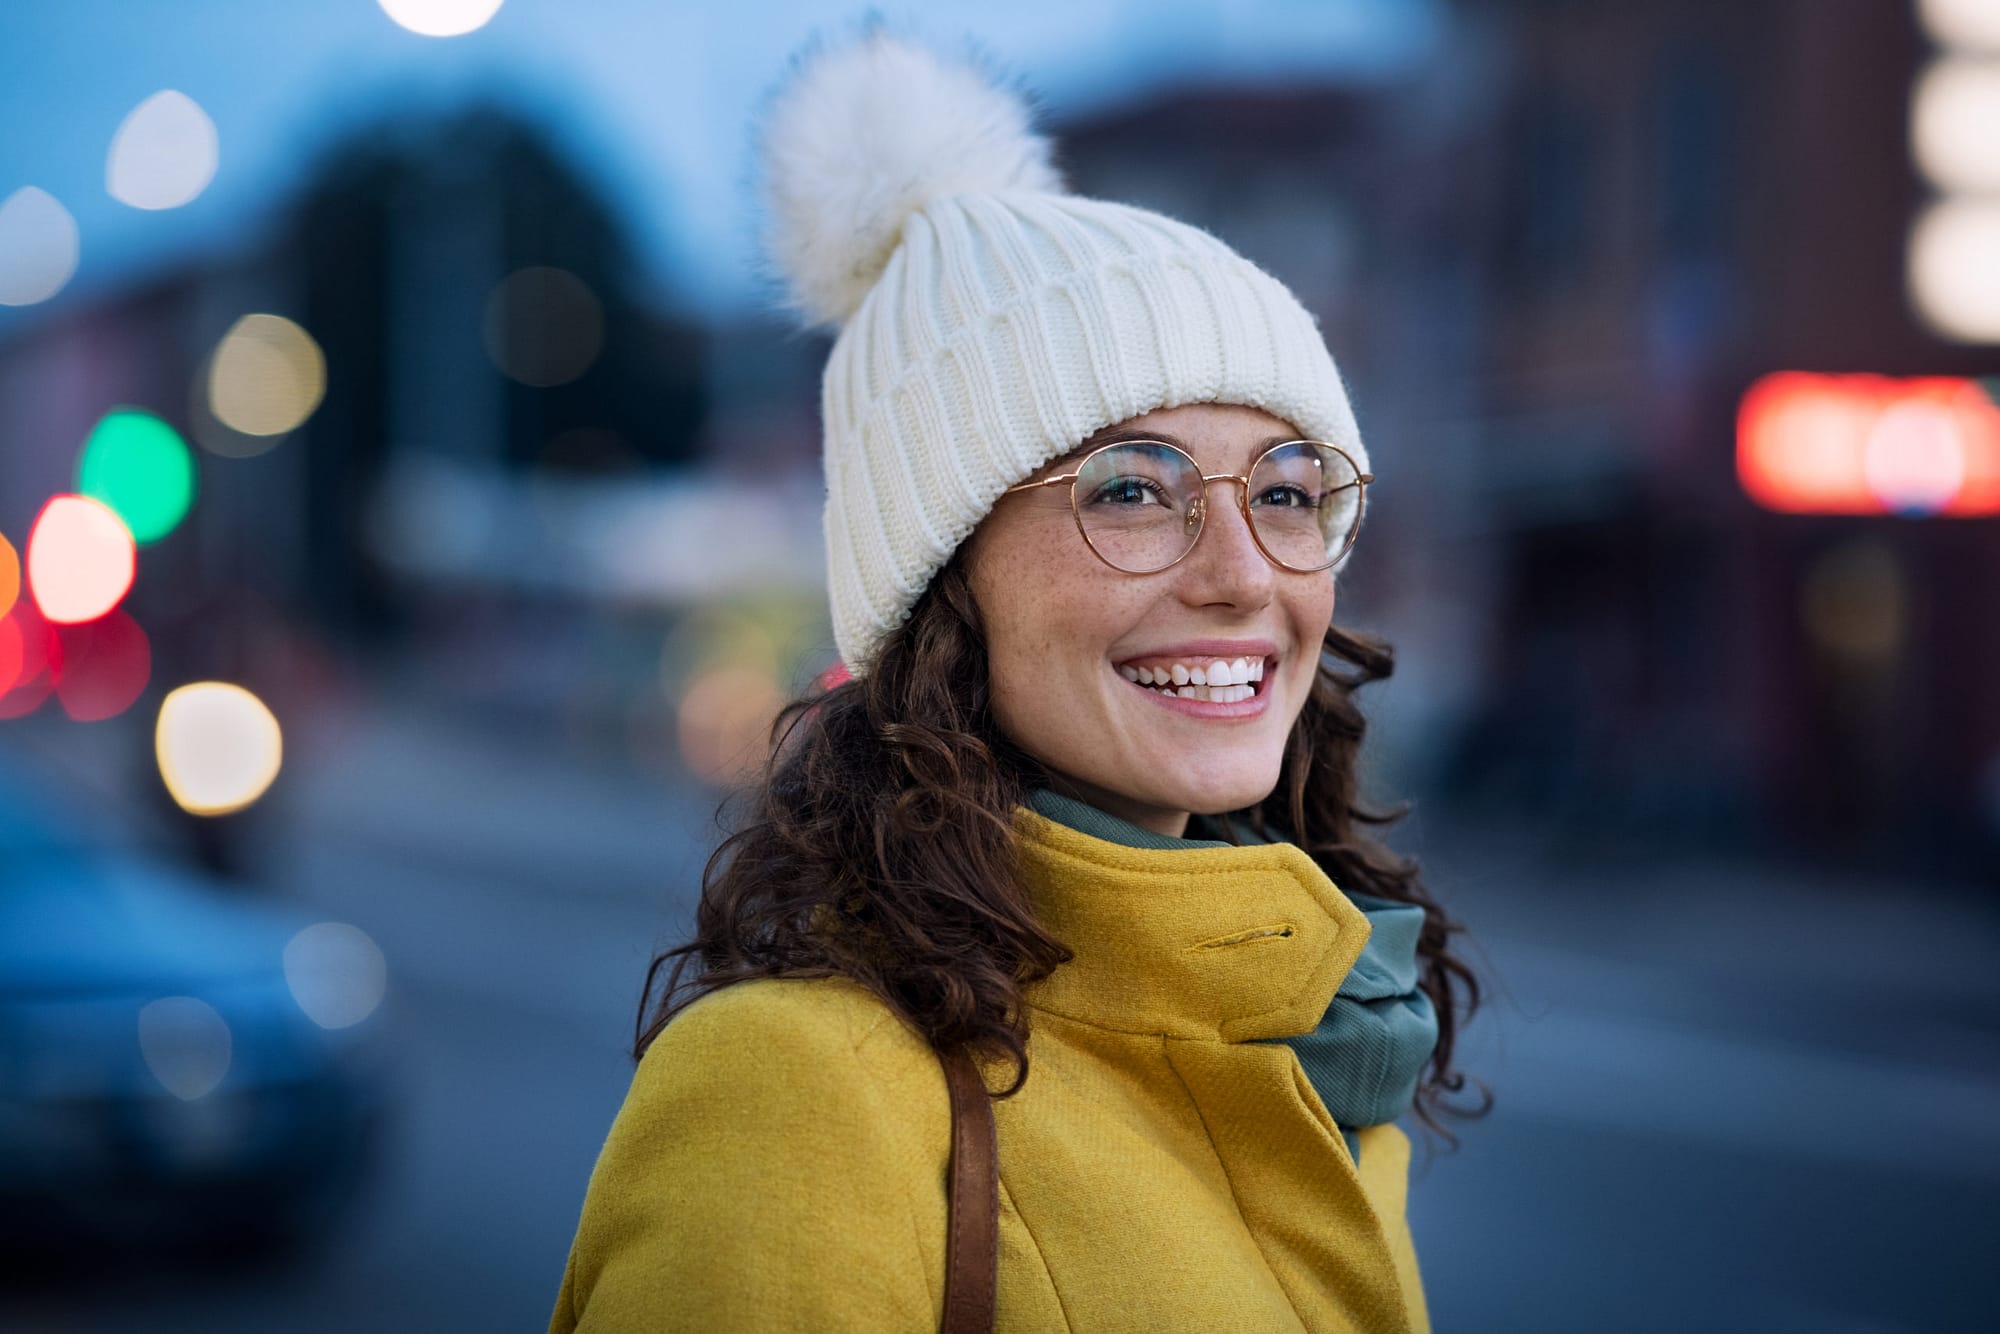 Smiling young woman wearing warm hat with eyeglasses on city street waiting for the bus.